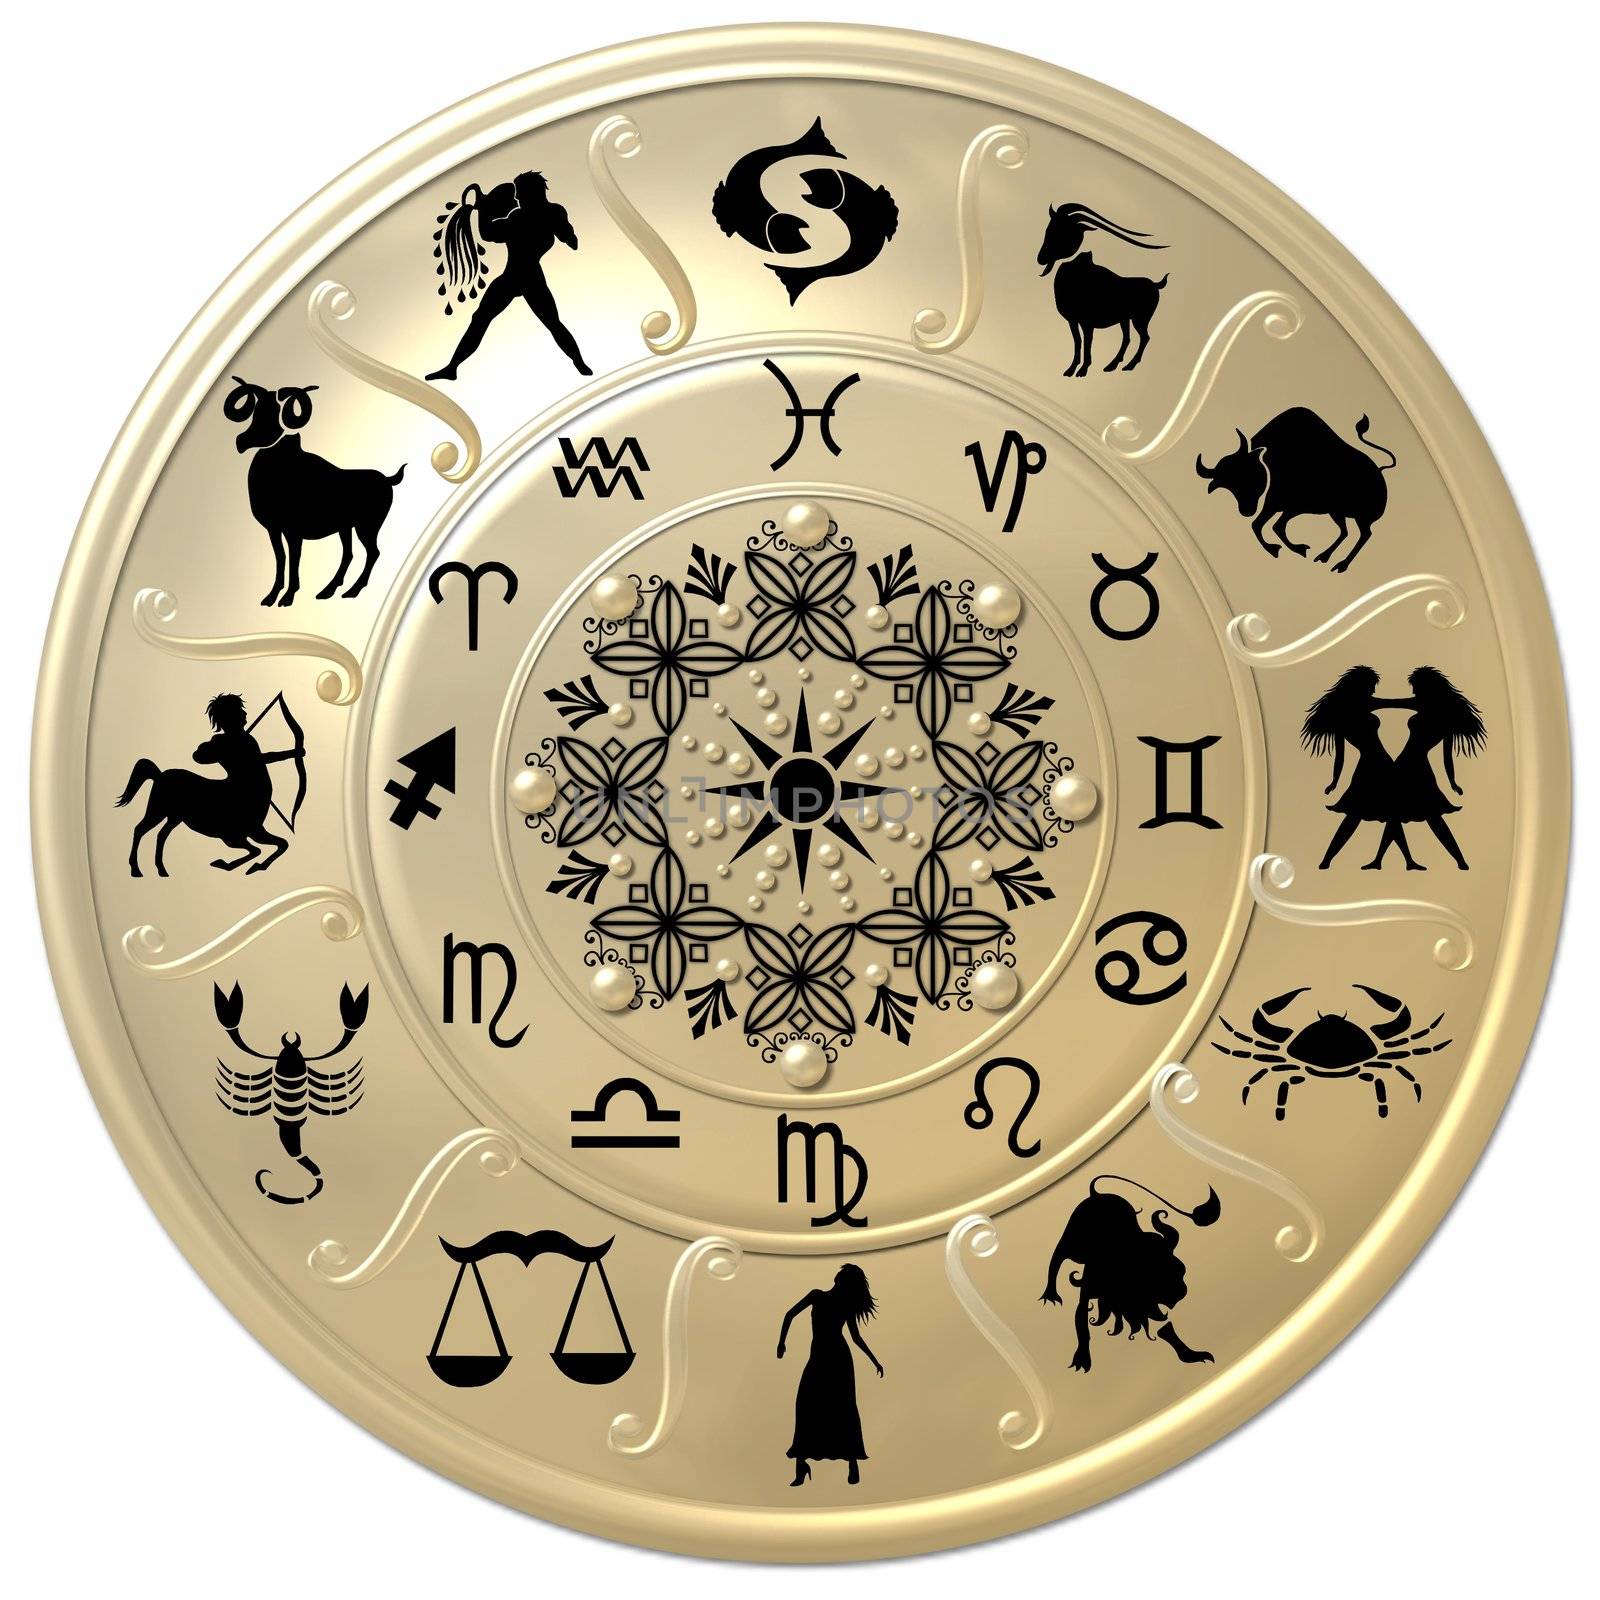 Zodiac Disc with Signs and Symbols